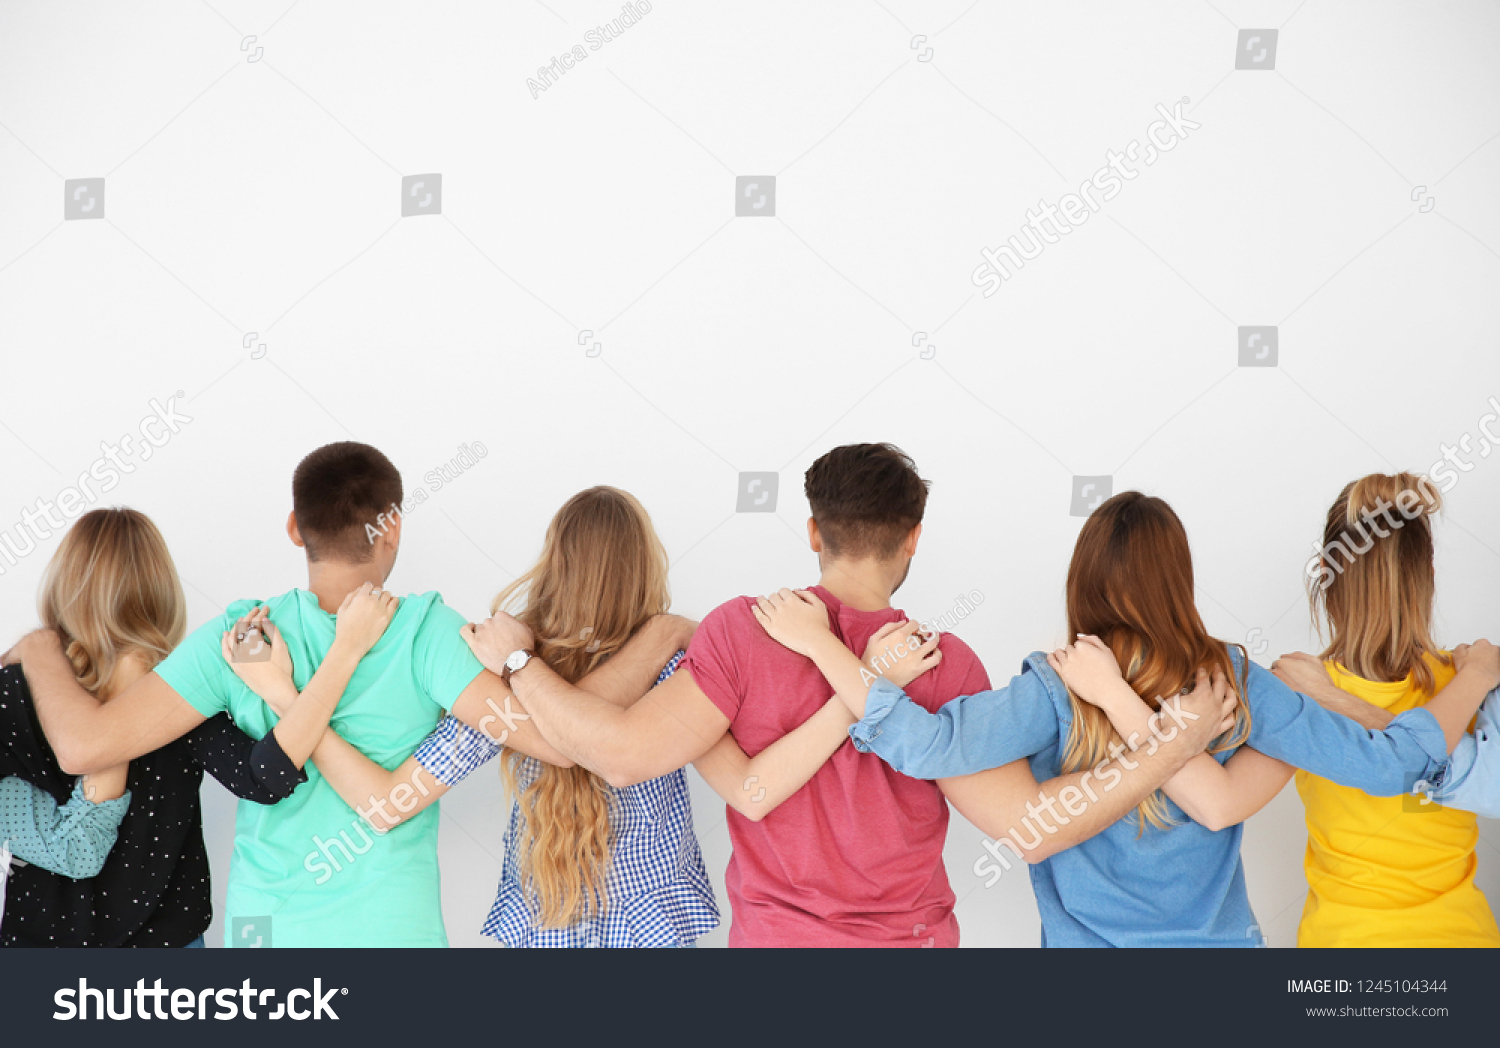 Young people together on light background. Unity concept #1245104344